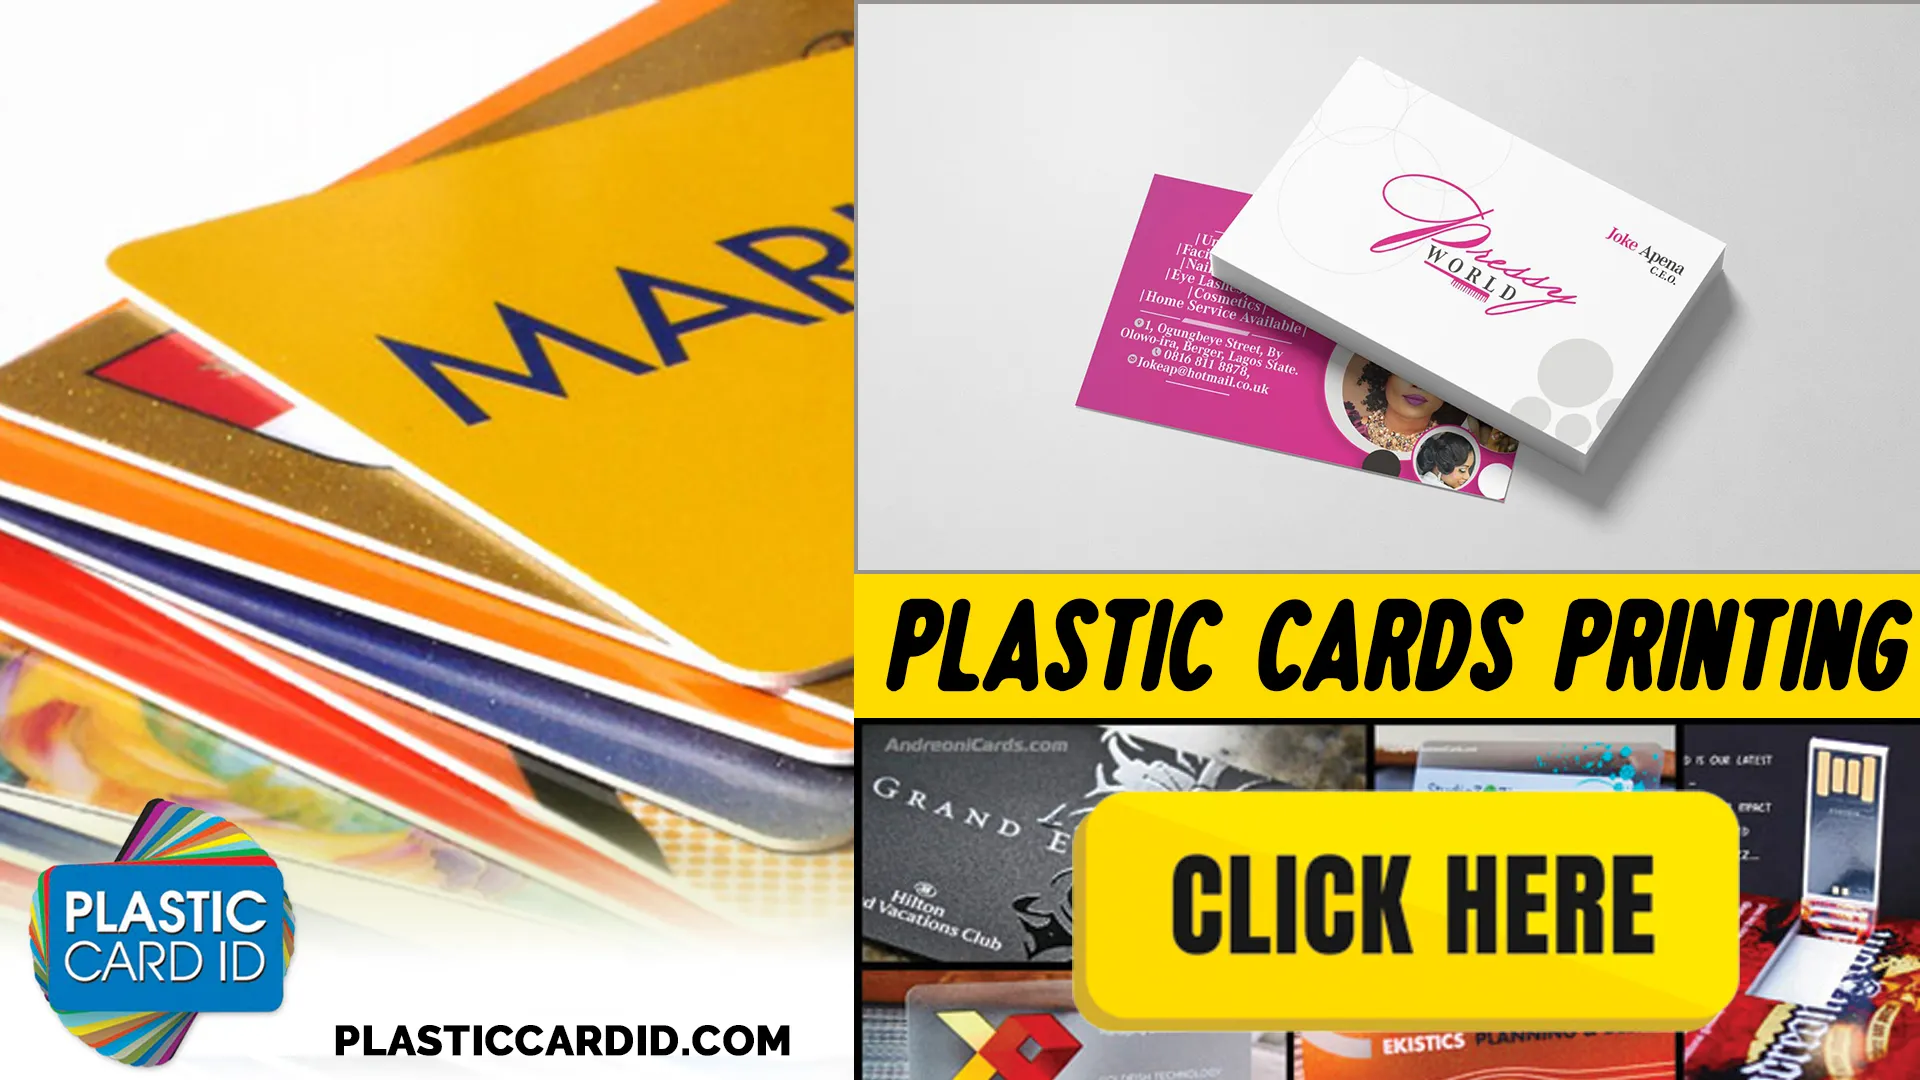 The Lifecycle of Your Investment in Printer Technology with Plastic Card ID
